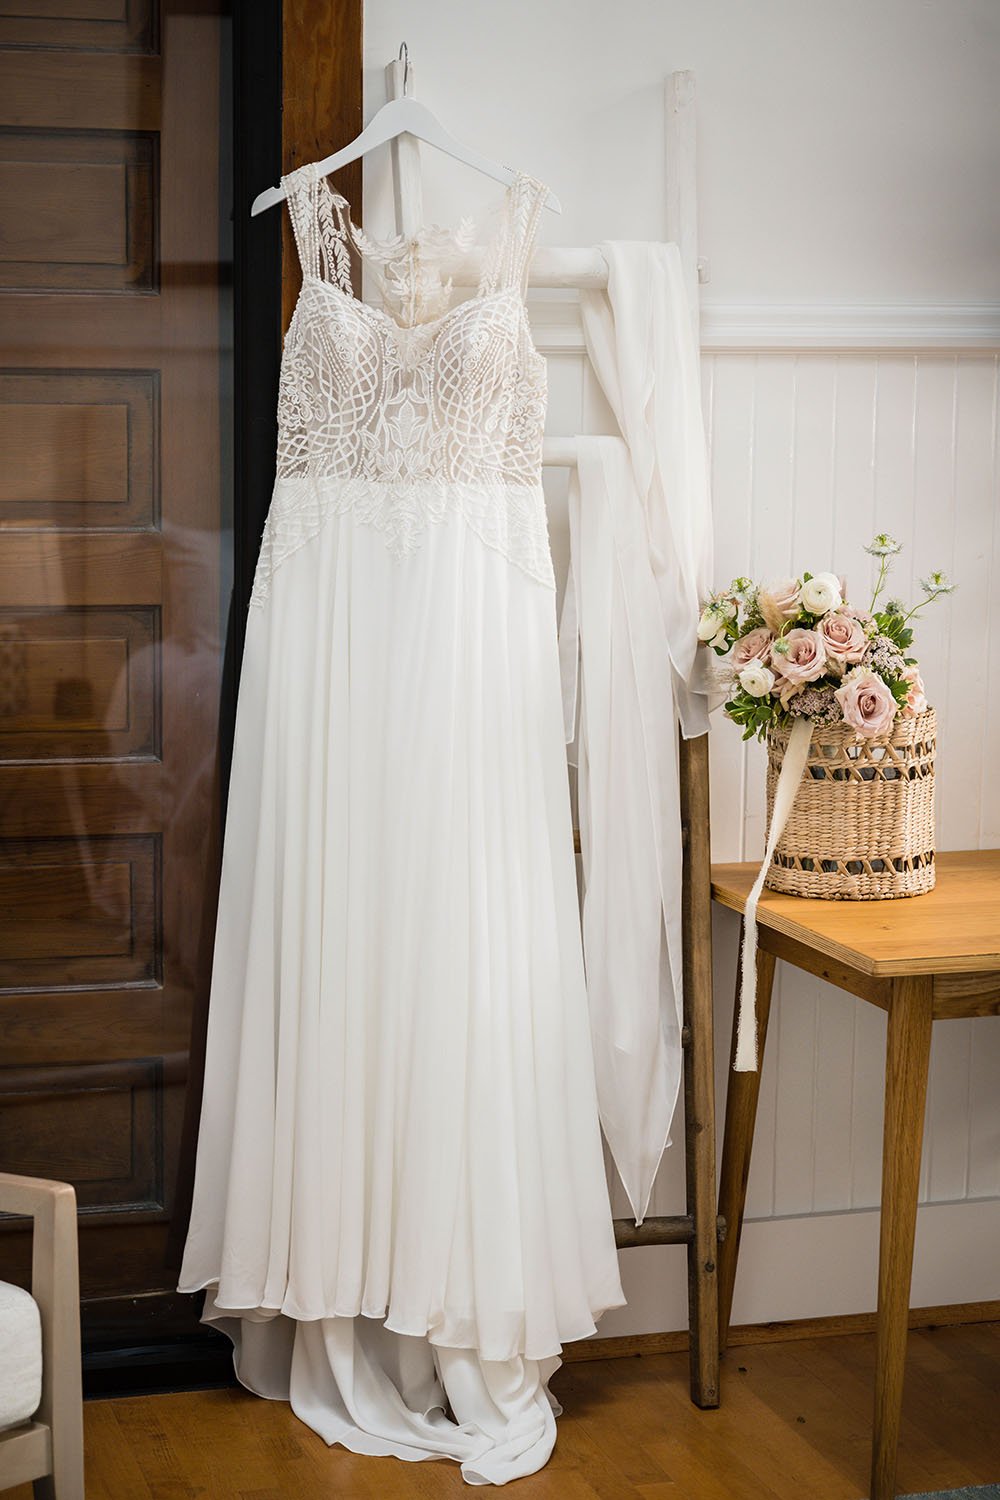 A wedding dress with its streamers are hung upon a white ladder in the Cottage Room at the Fire Station One Boutique Hotel in Downtown Roanoke. Next to the dress is the bride's wedding bouquet.